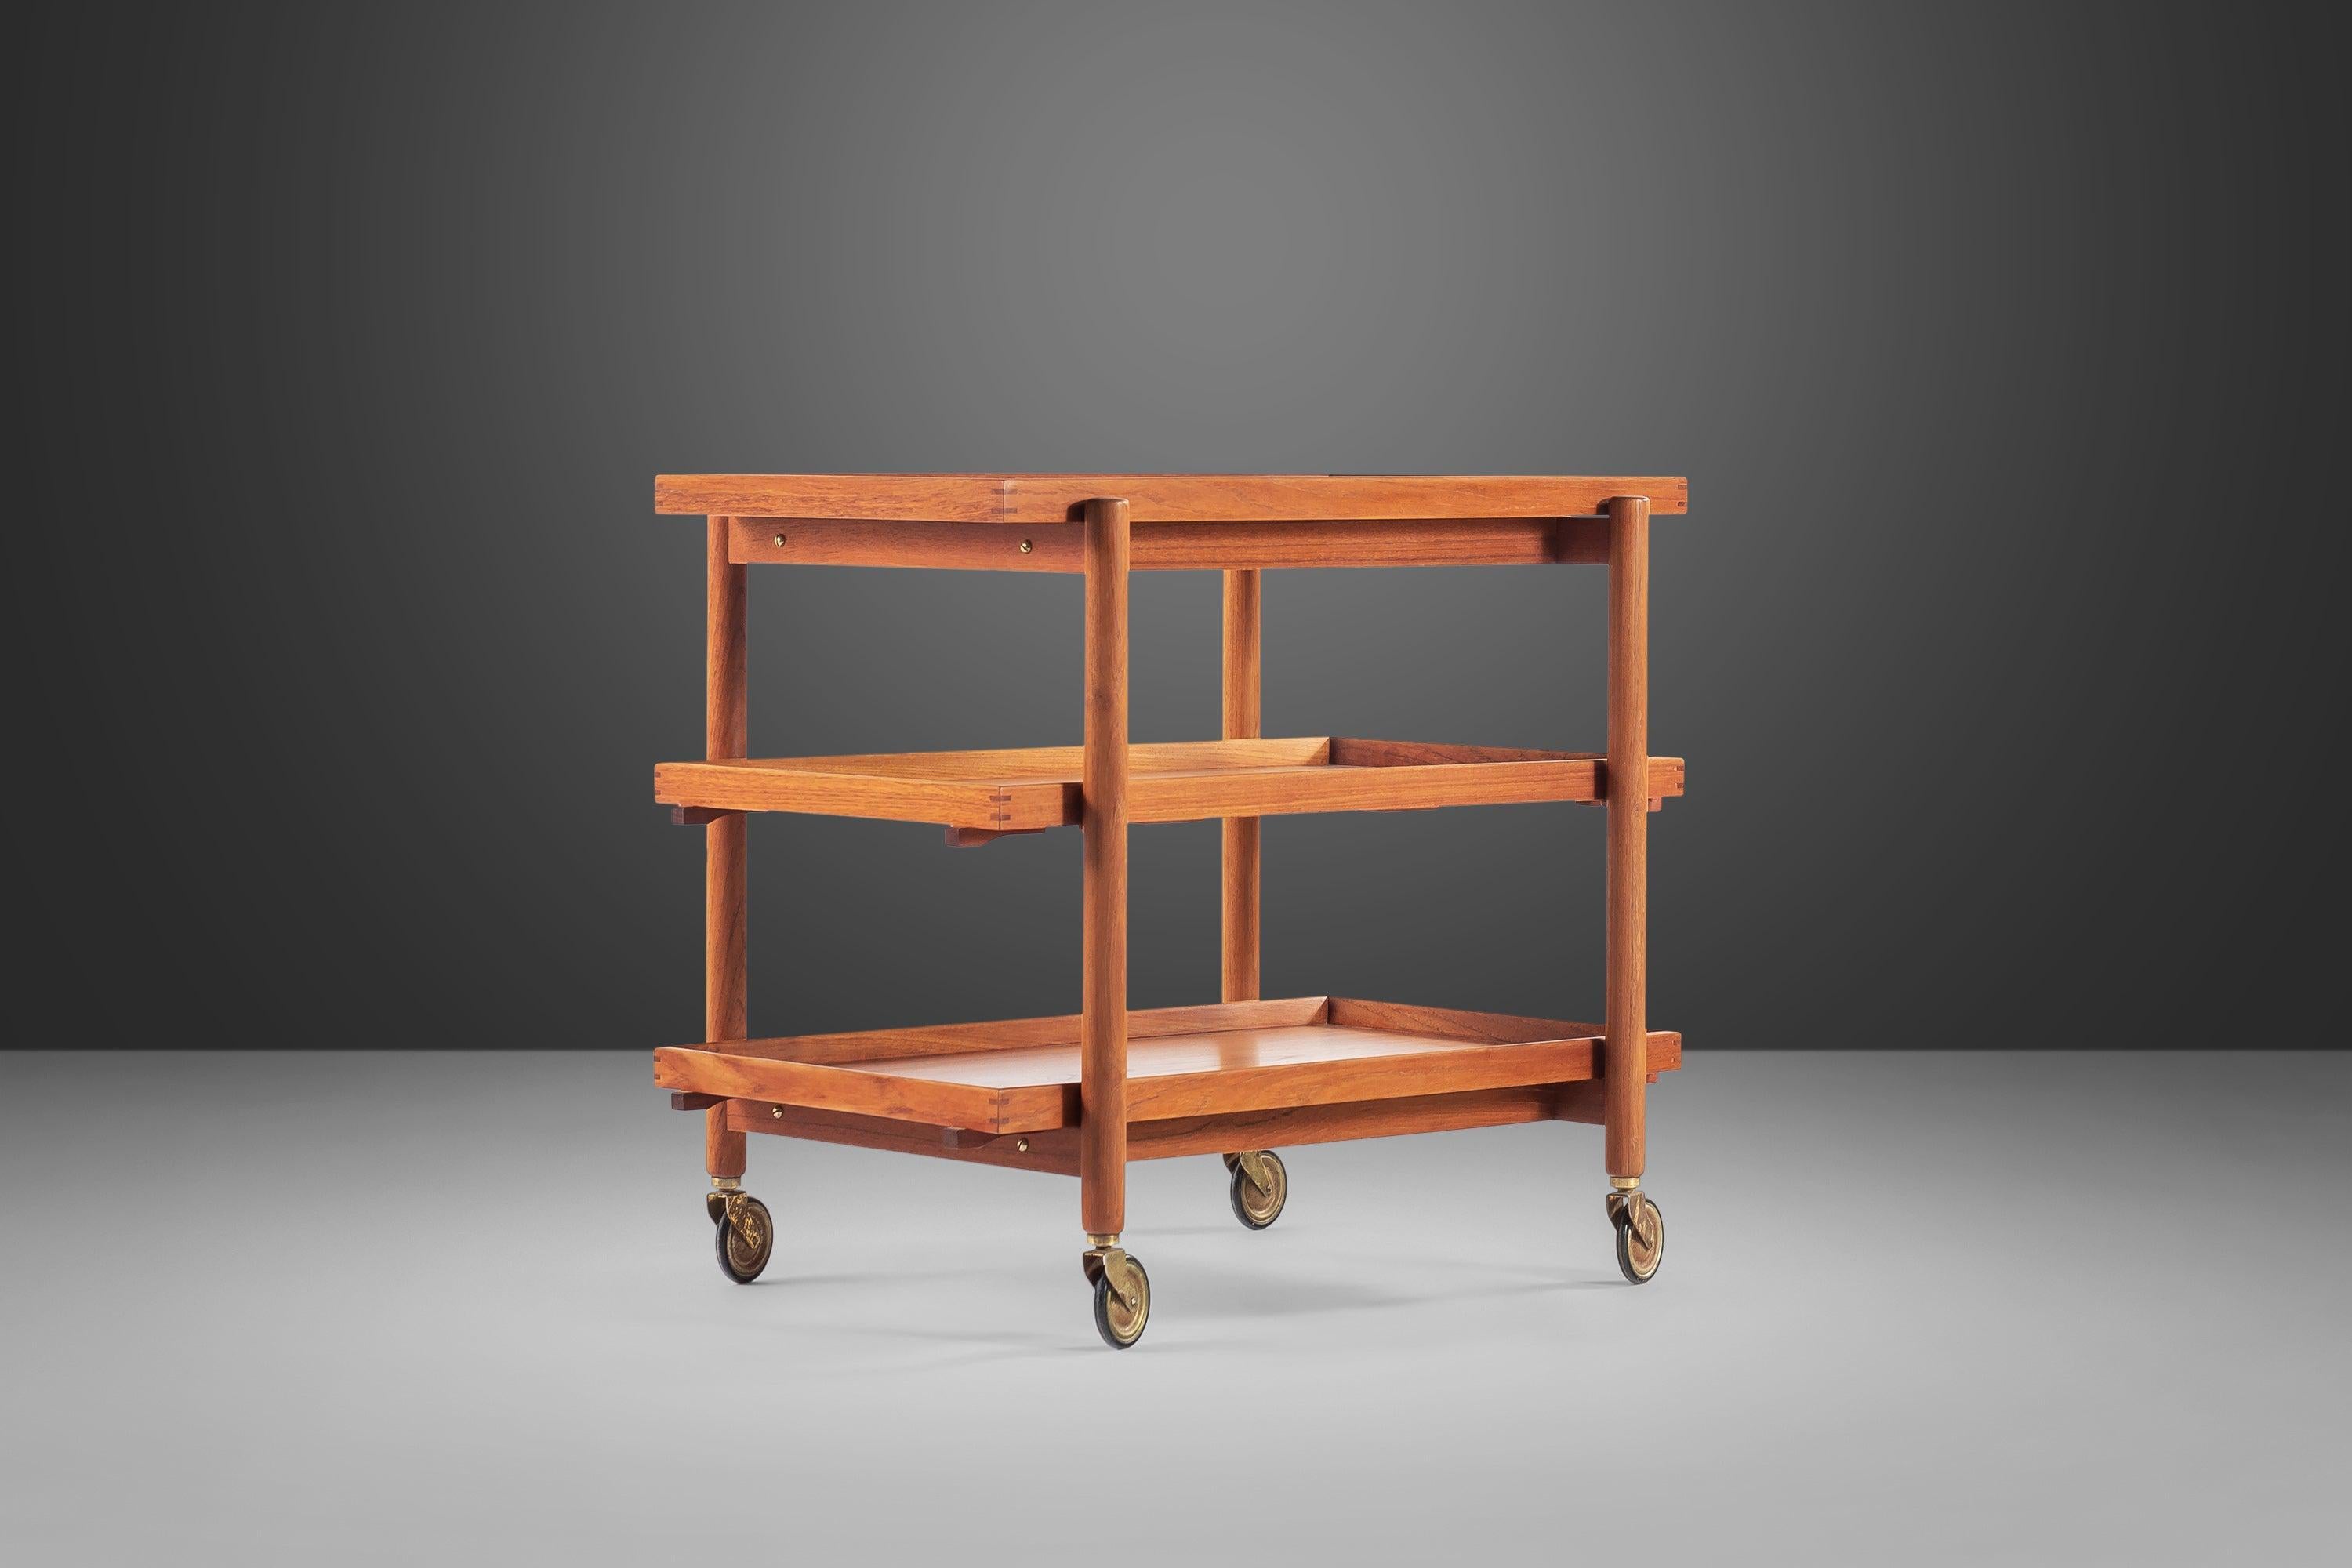 Mid-20th Century Expandable Danish Modern Bar Cart in Teak by Poul Hundevad, for Domus Danica